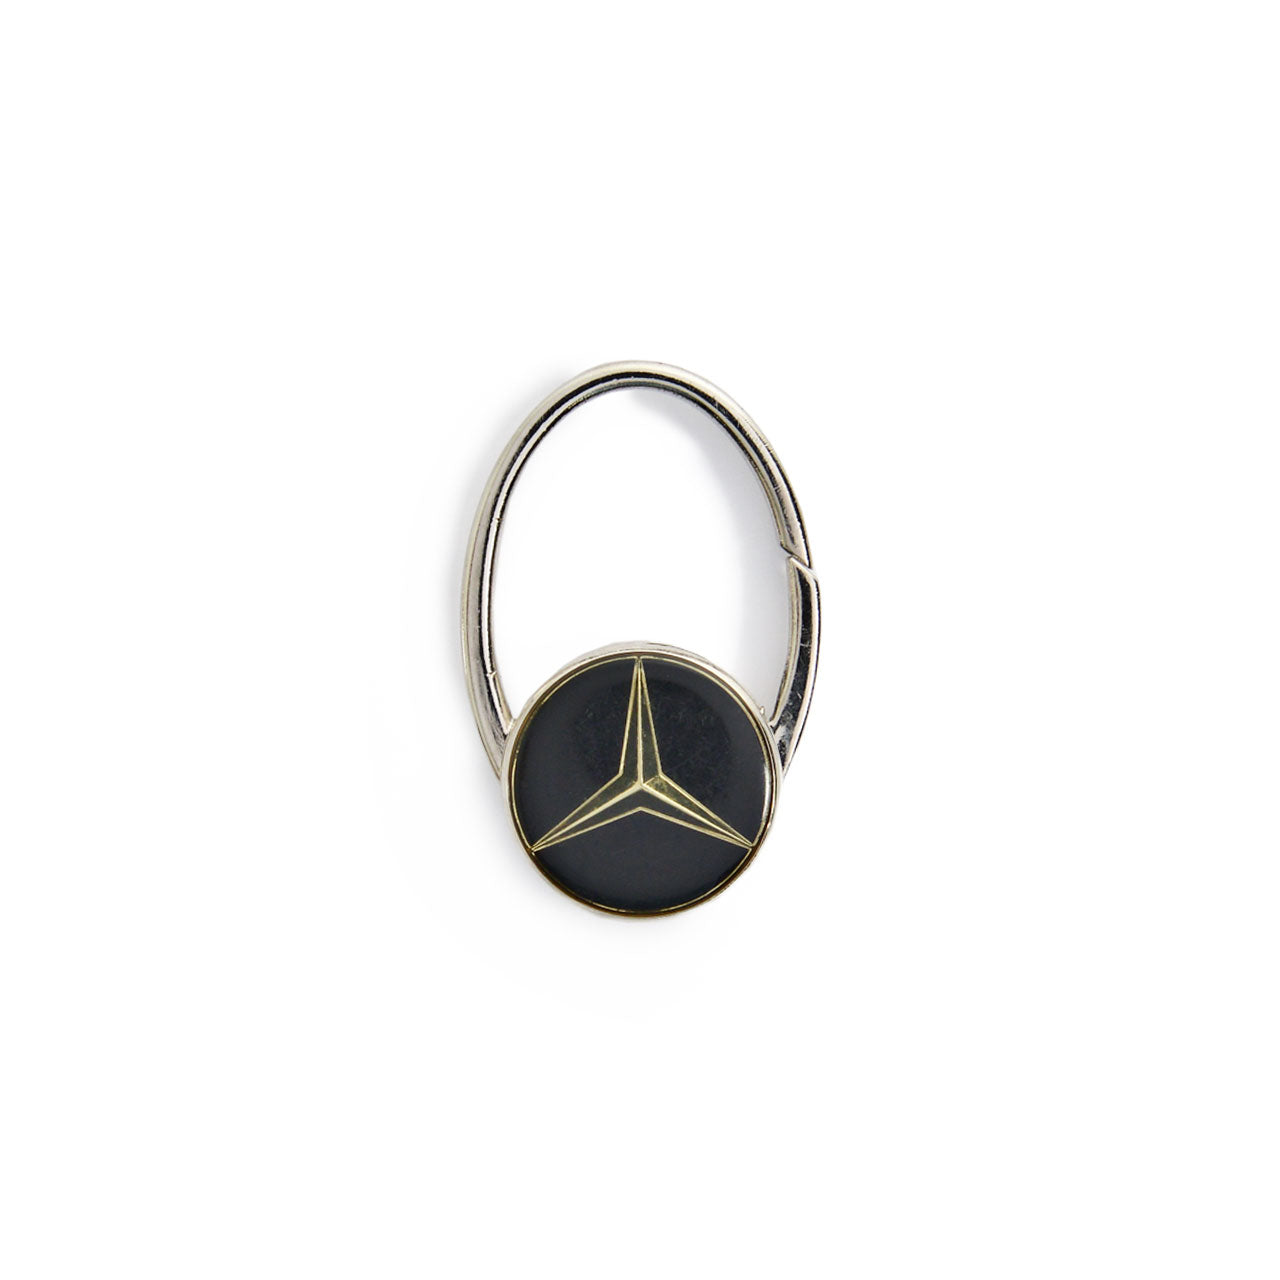 Mr. Cupps x Uncrate Vintage MB Integrated Keychain